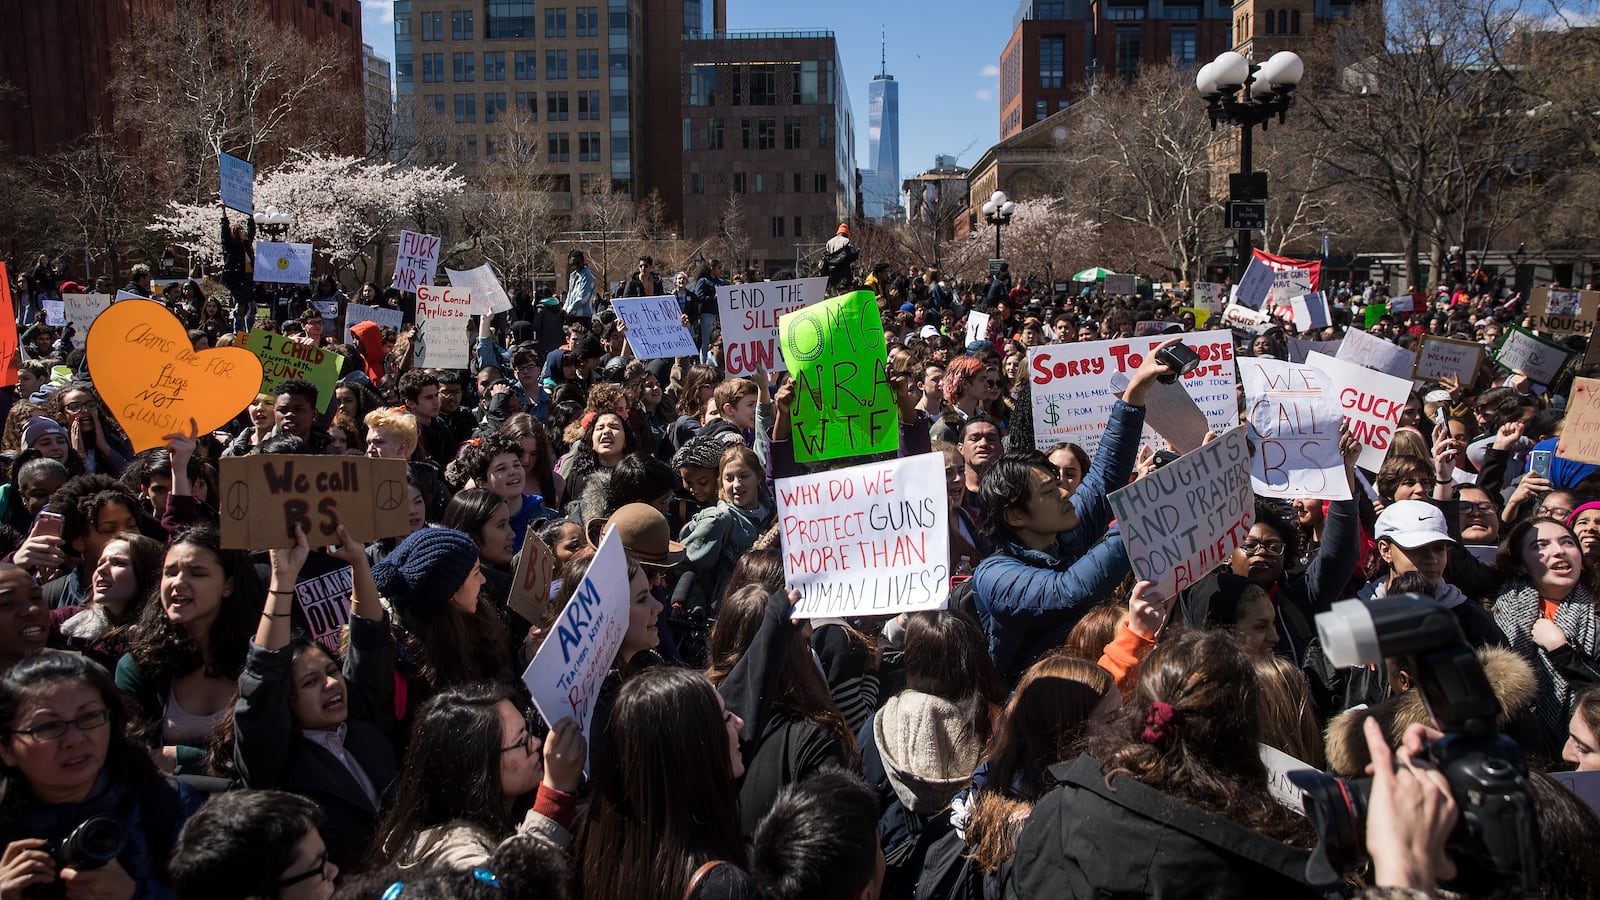 NEW YORK, NY - APRIL 20: Student activists rally against gun violence at Washington Square Park, near the campus of New York University, April 20, 2018 in New York City. On the anniversary of the 1999 Columbine High School mass shooting, student activists across the country are participating in school walkouts to demand action on gun reform. (Photo by Drew Angerer/Getty Images)